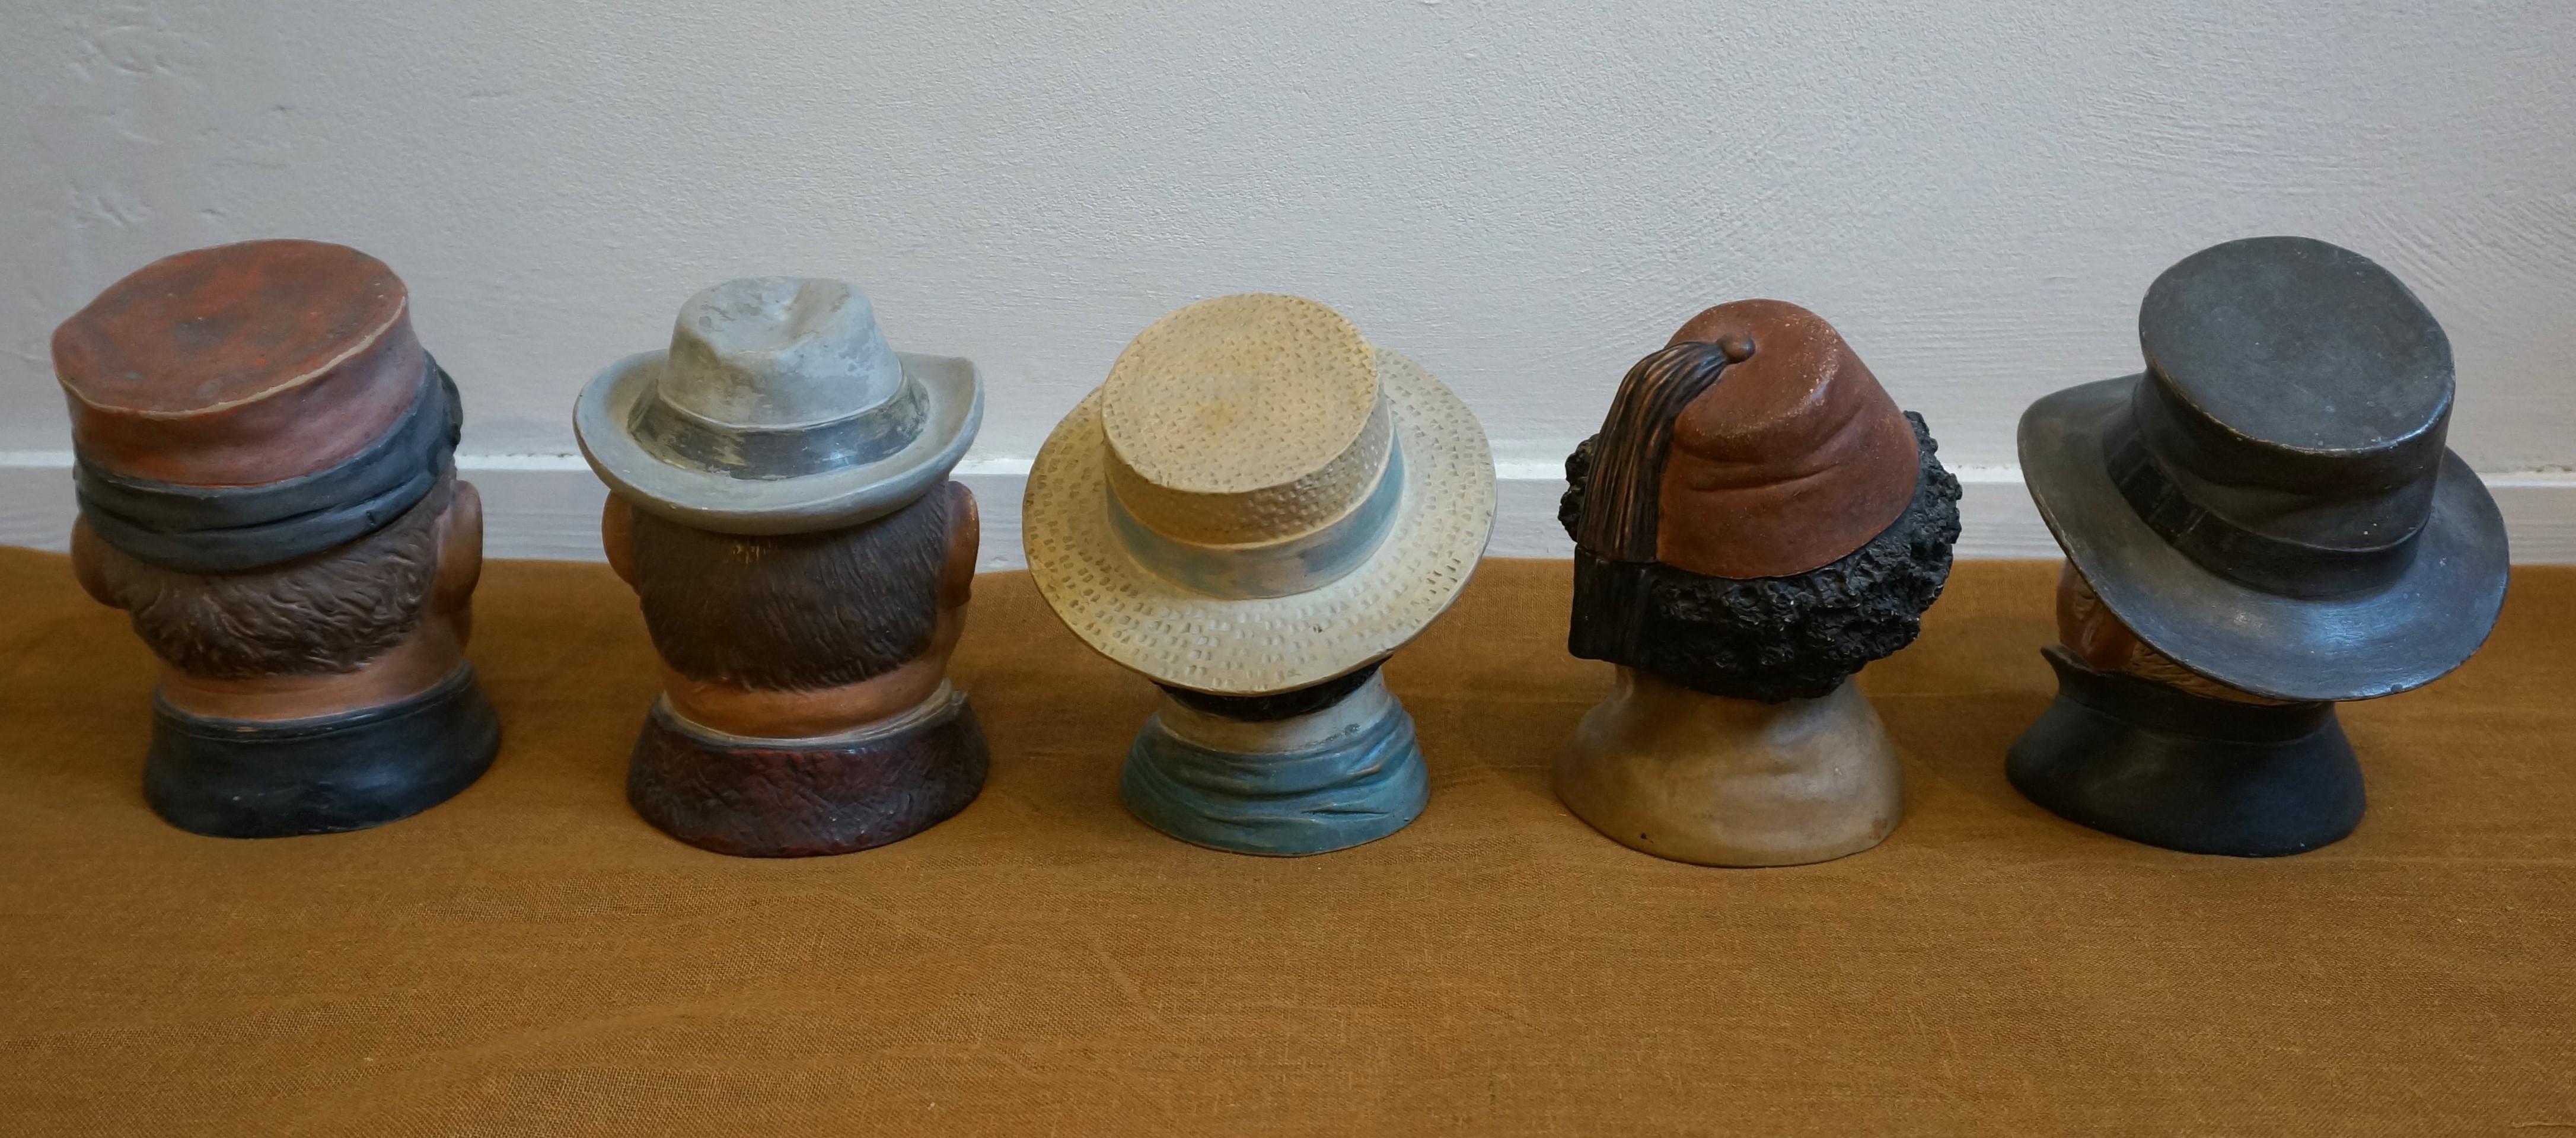 Rare collection 5 Antique Ceramic Tobacco Jars Humidors Figural, Bernard Bloch For Sale 4